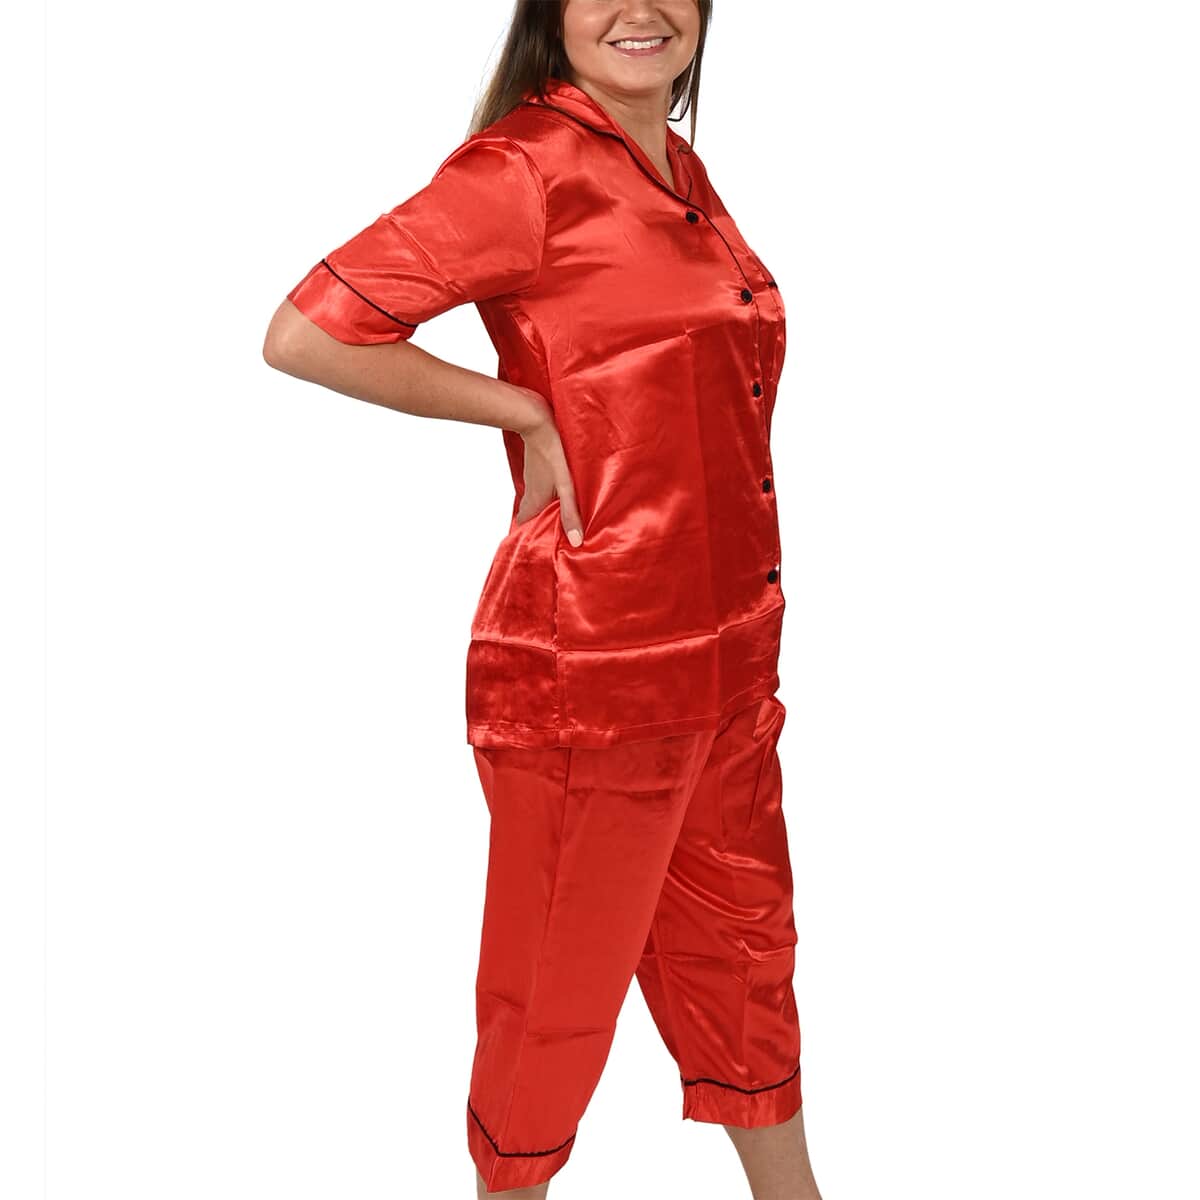 Satin Short Sleeve Collared Pajama Set with Piping Detail - Candy Apple Red - 2X image number 2